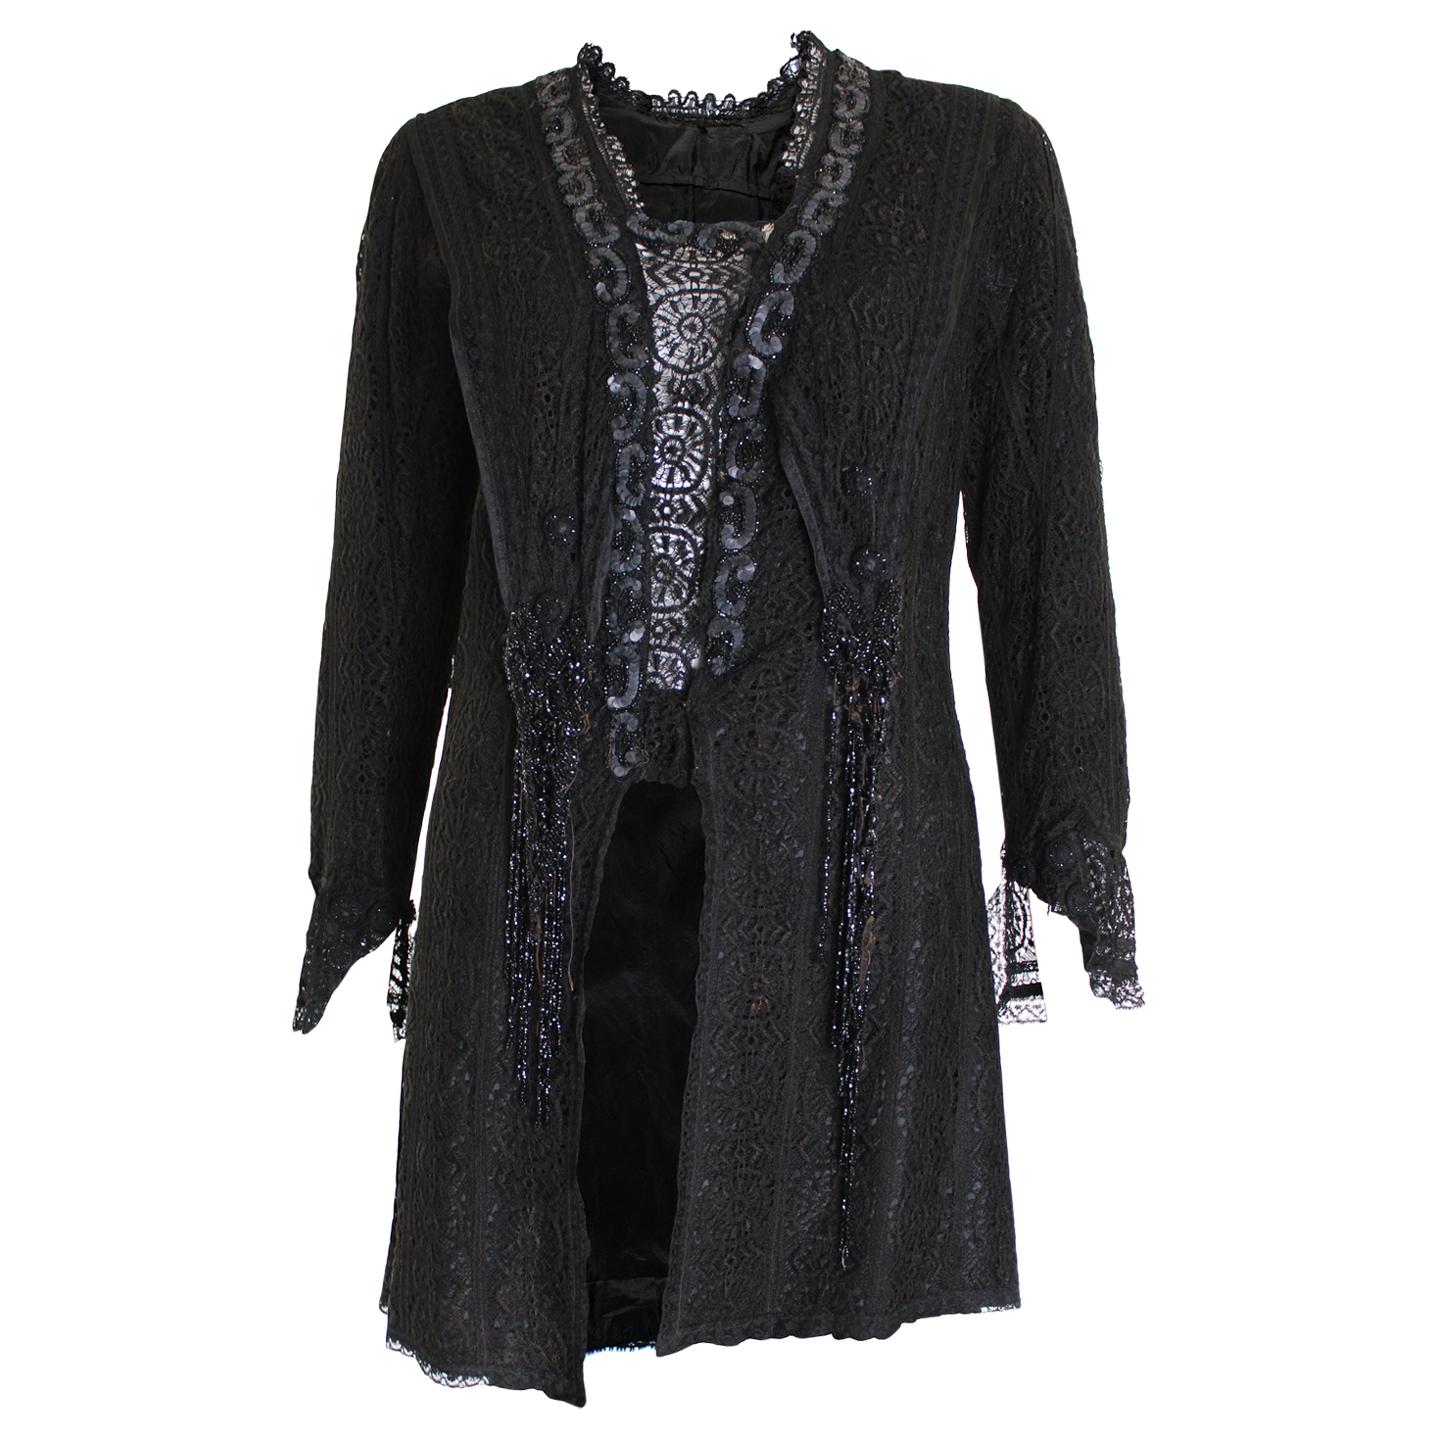 Vintage Victorian Black Lace Jacket with Jet Beading